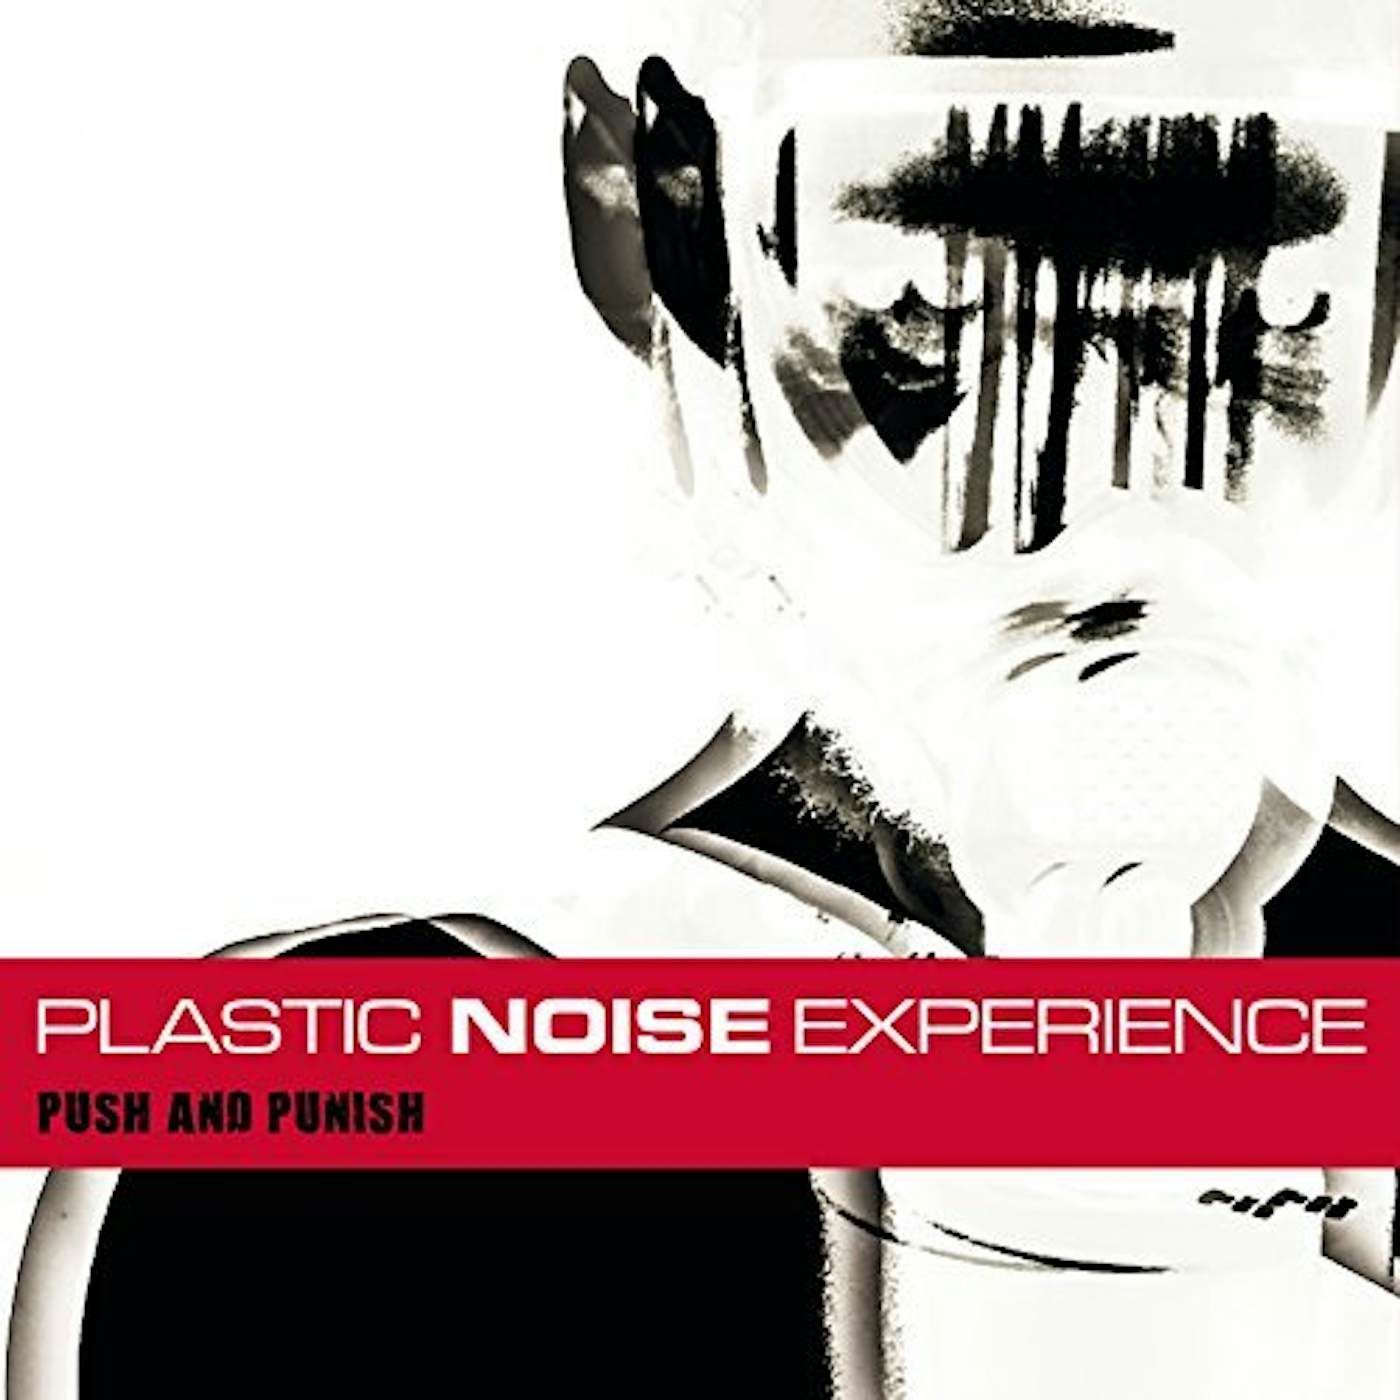 The Plastic Noise Experience Push And Punish Vinyl Record